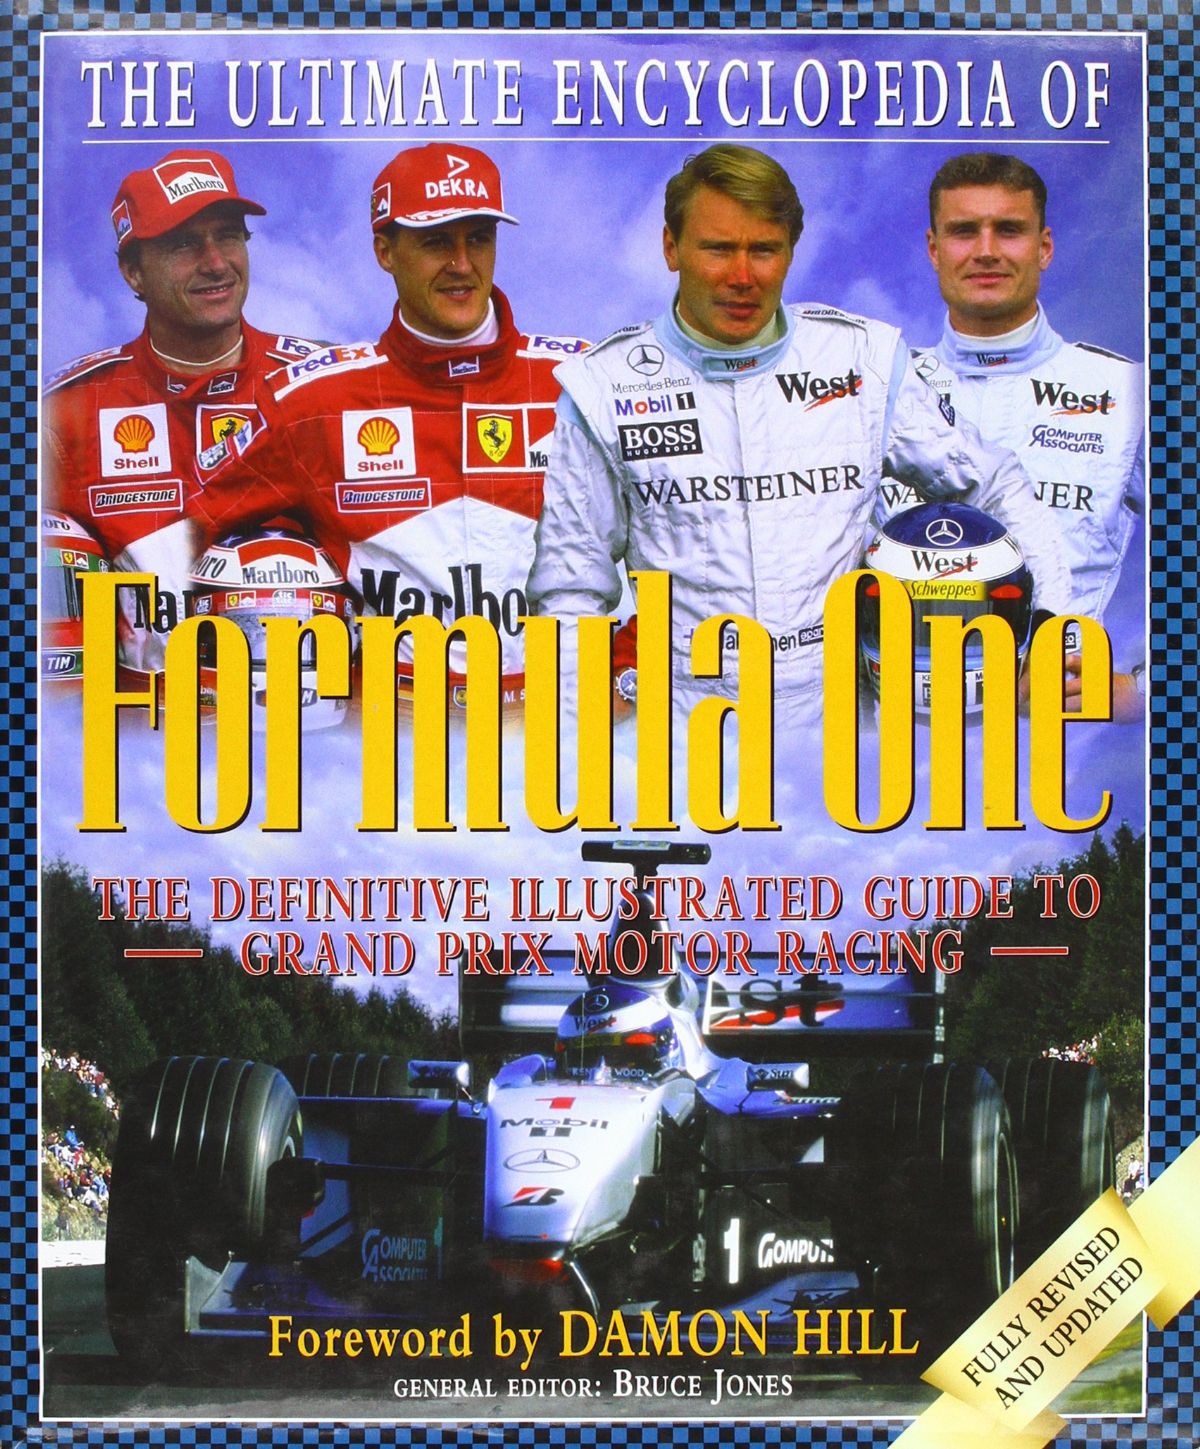 The Ultimate Encyclopedia of FORMULA ONE